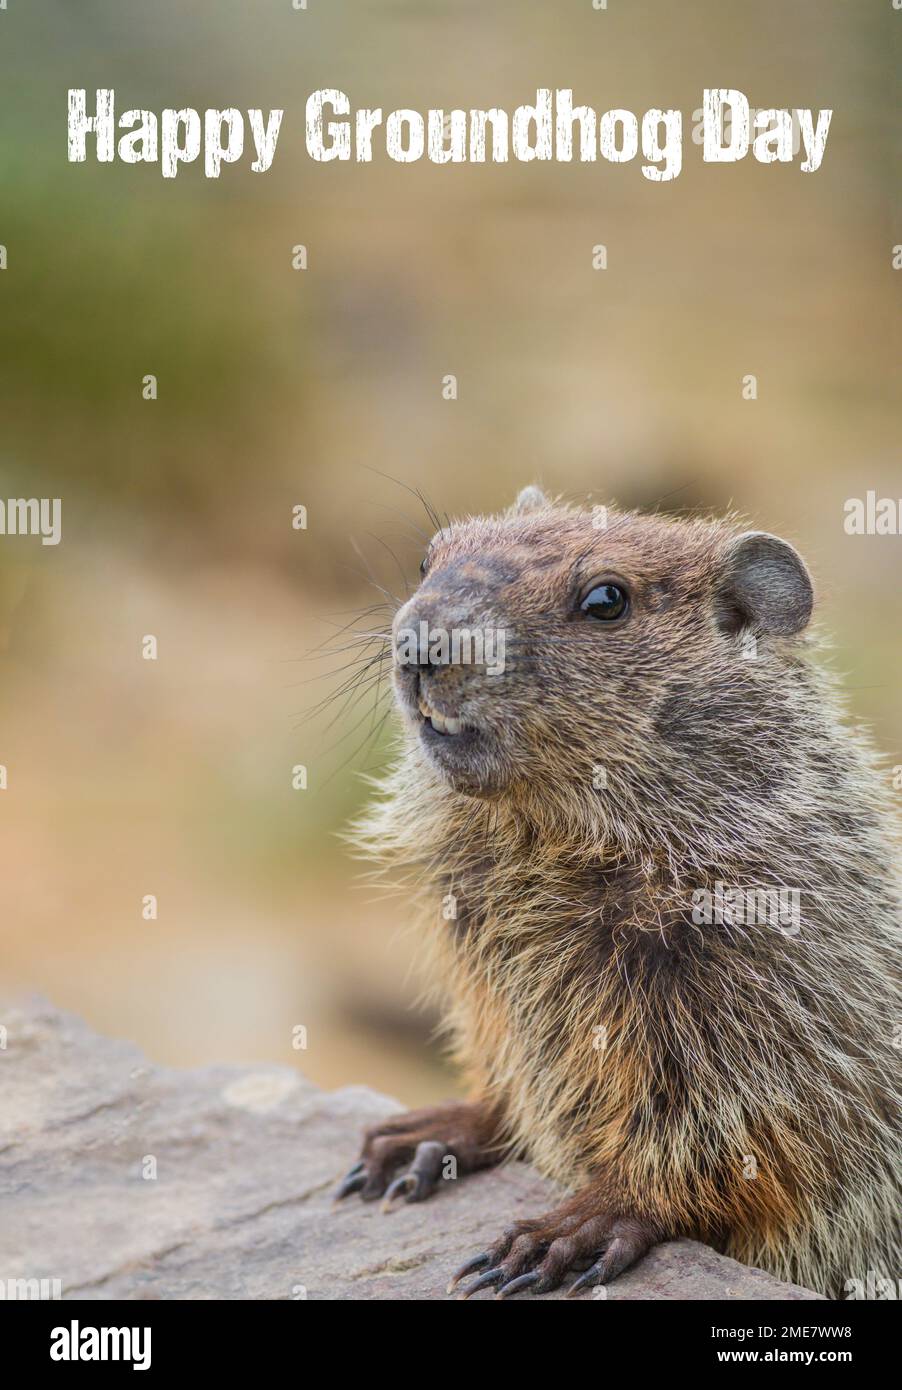 Cute young groundhog closeup great for Happy Groundhog Day distressed text with copy space Stock Photo